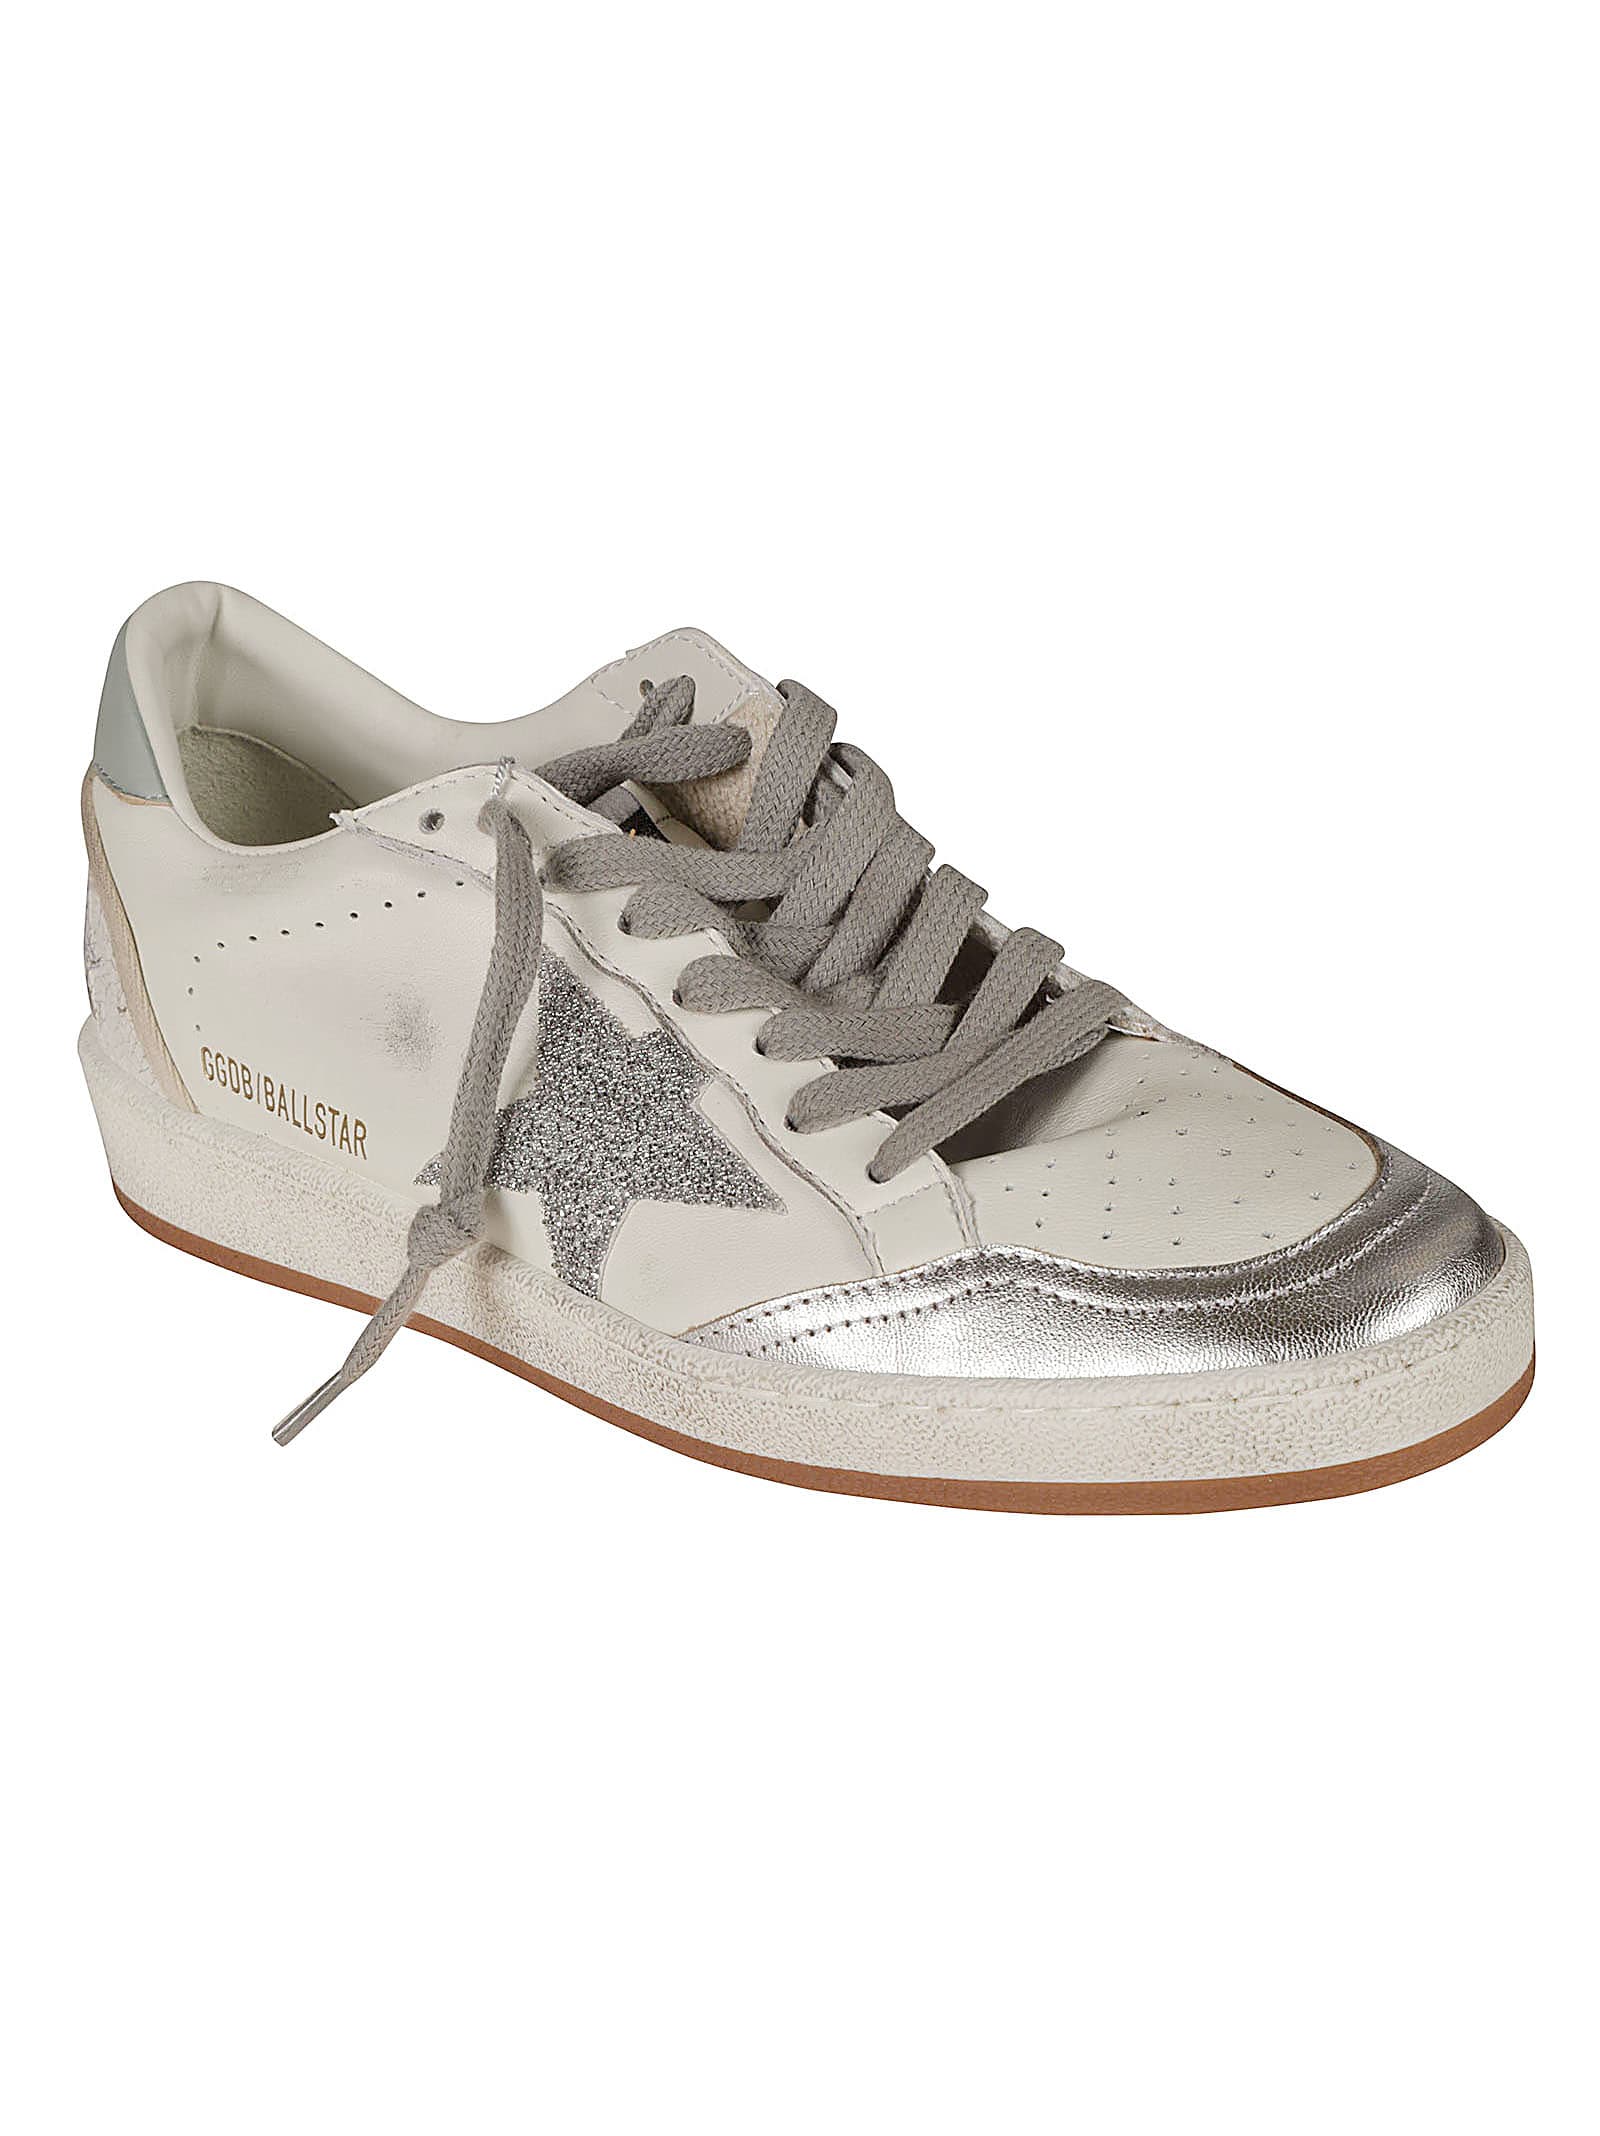 Shop Golden Goose Ball-star Sneakers In White/silver